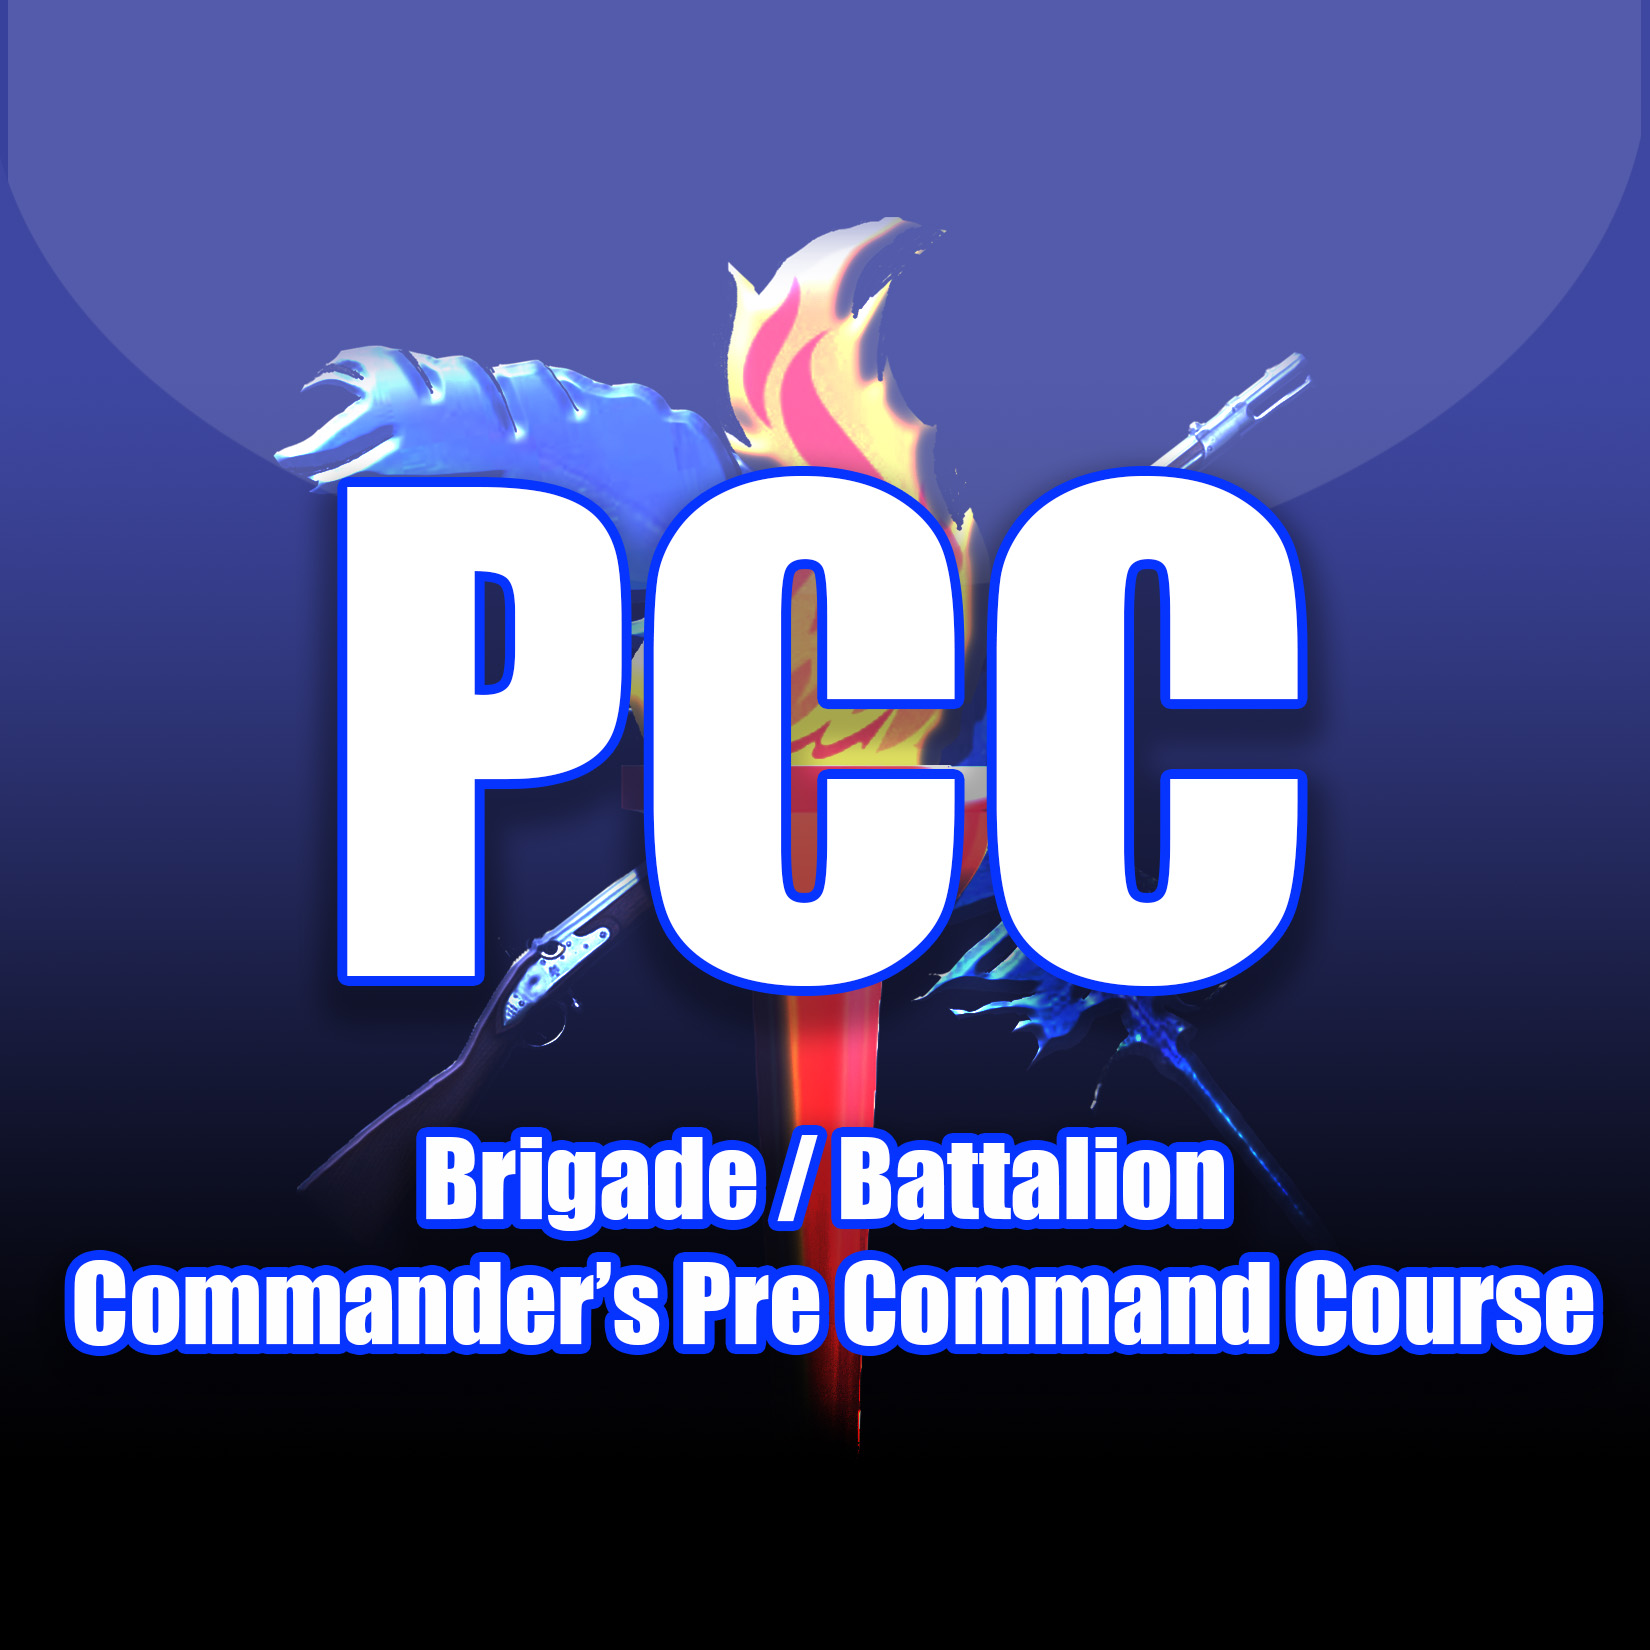 Brigade and Battlion Command's Course